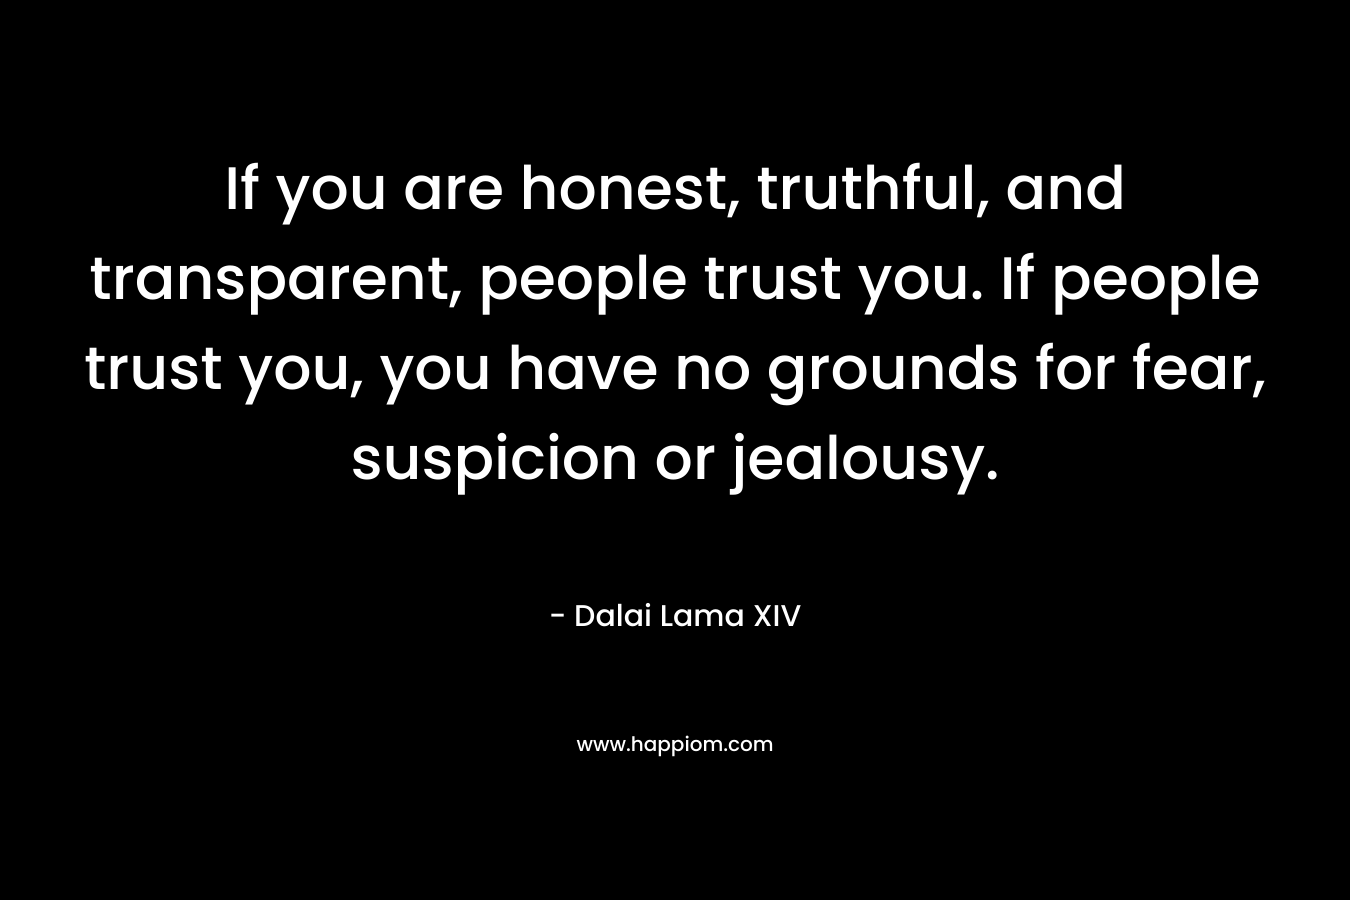 If you are honest, truthful, and transparent, people trust you. If people trust you, you have no grounds for fear, suspicion or jealousy.